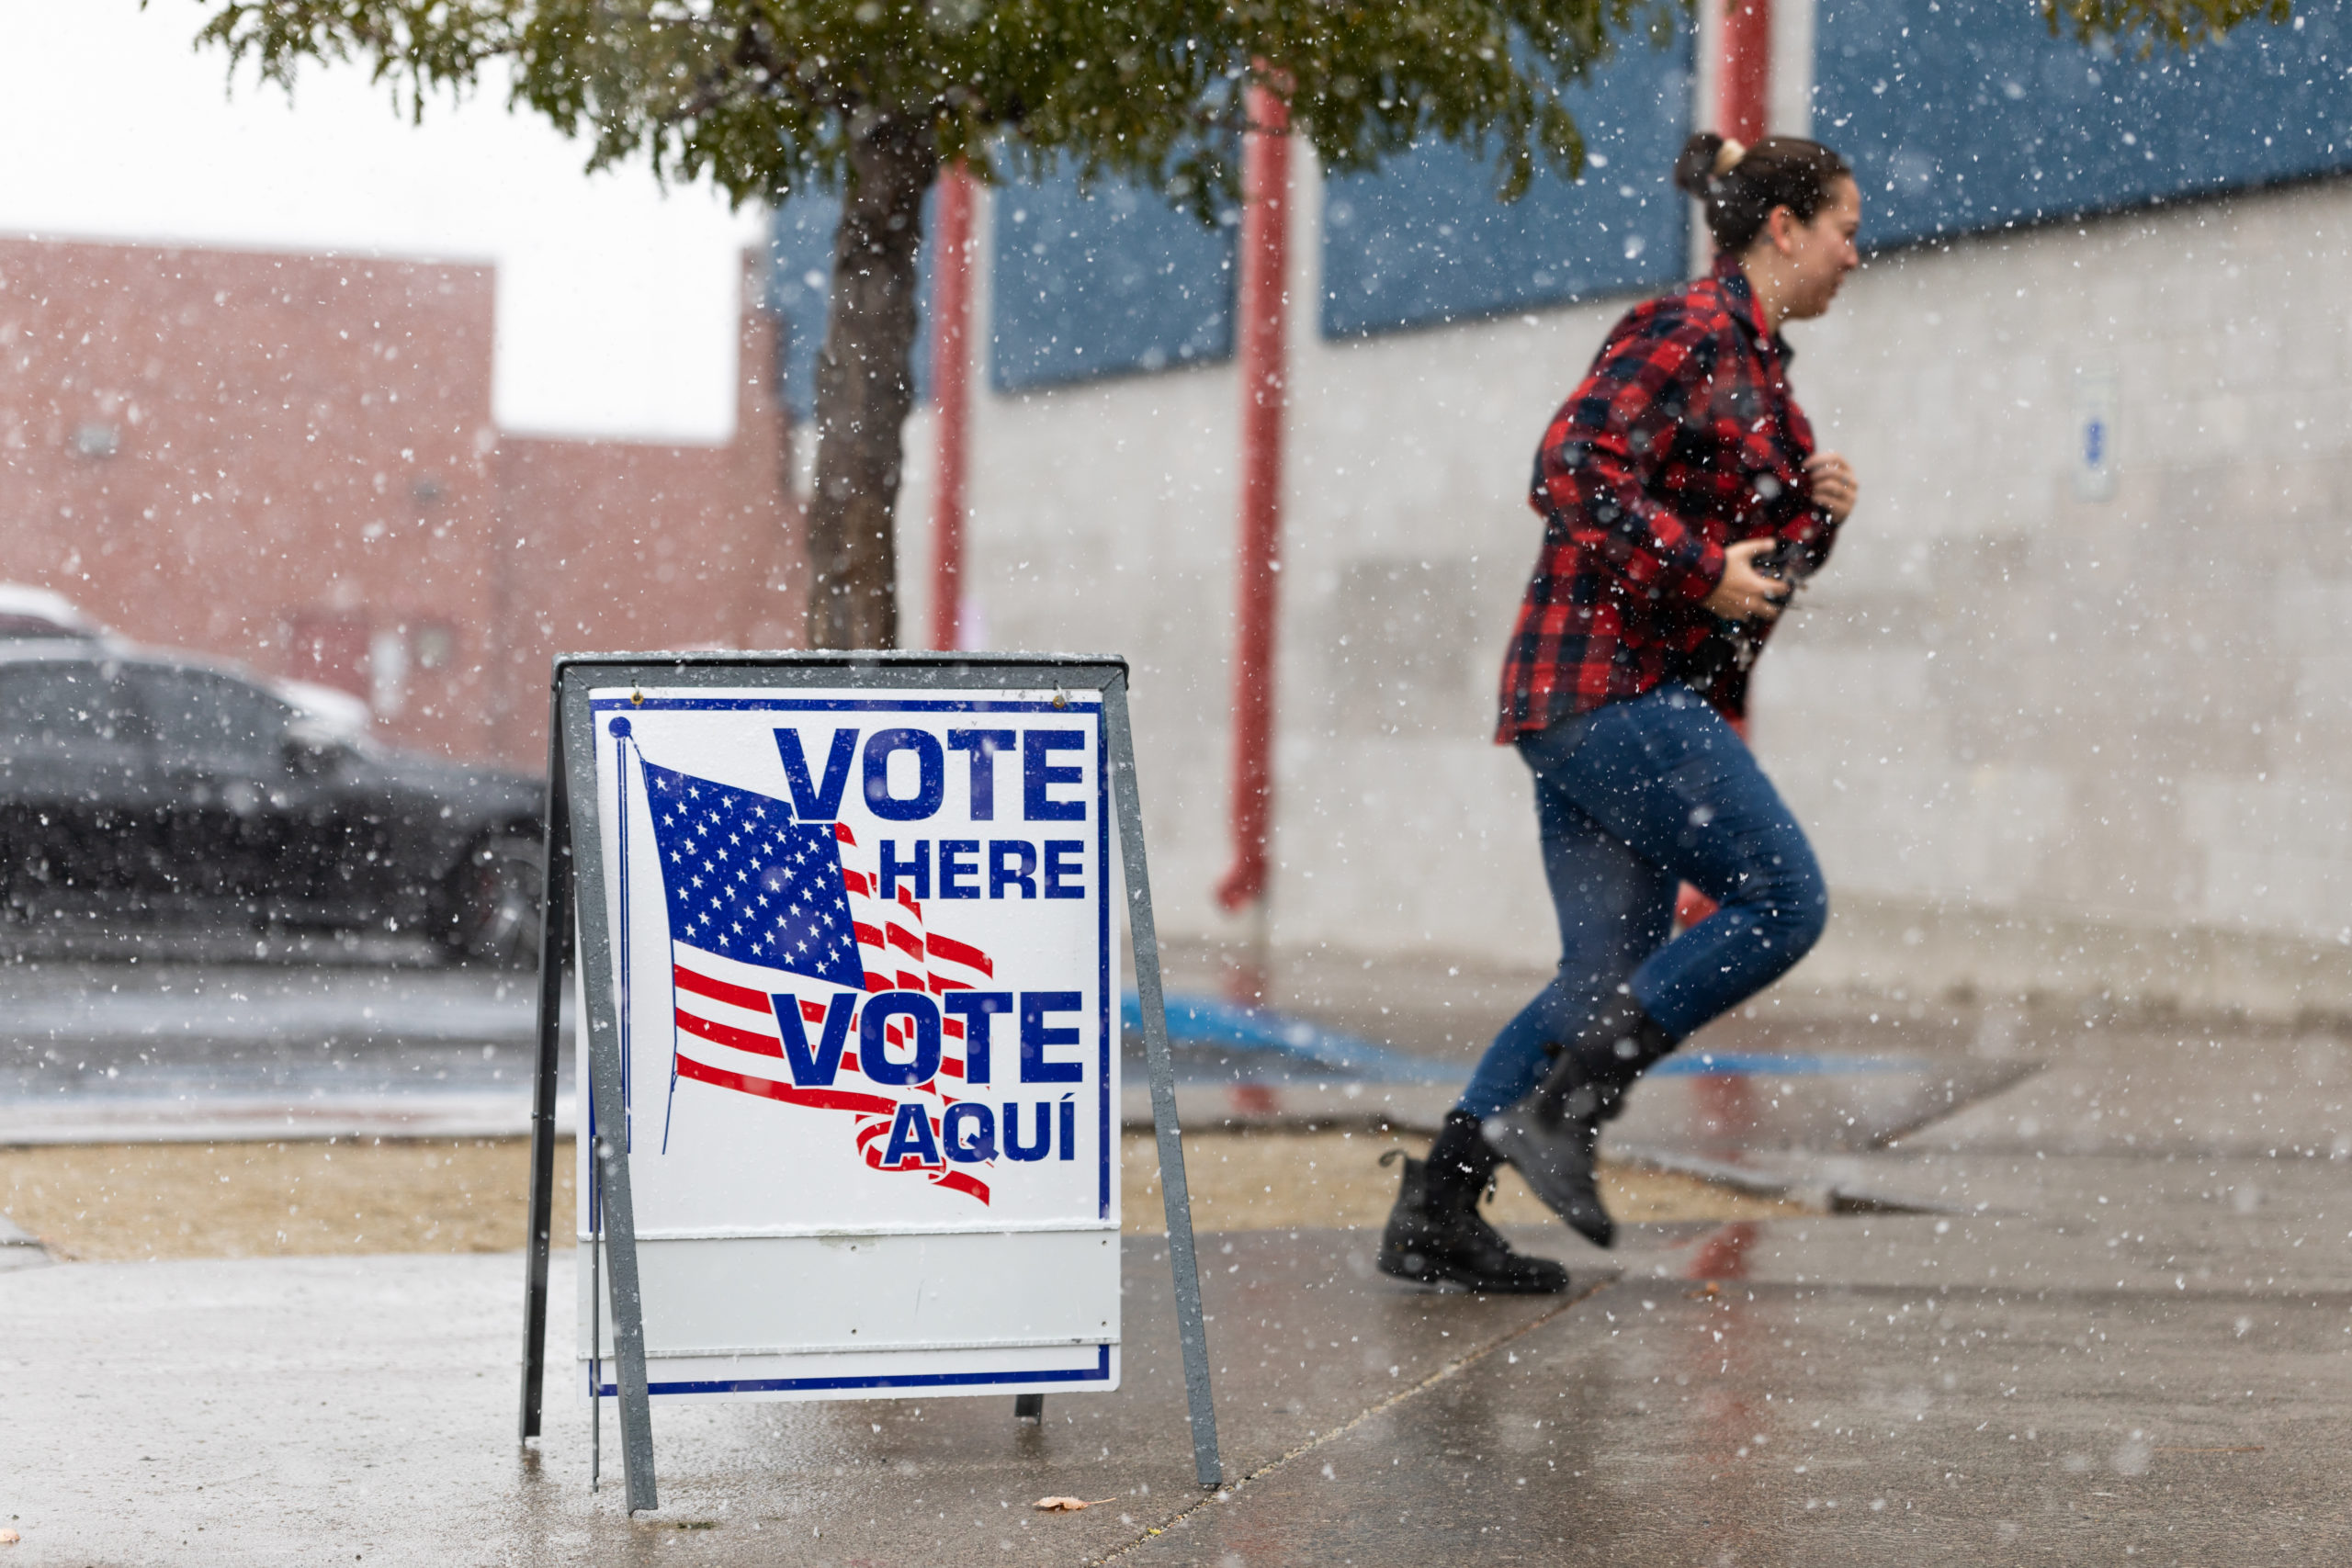 A Washoe County voter runs through the snow to cast their ballot inside Reno High School on November 8, 2022 in Reno, Nevada. After months of candidates campaigning, Americans are voting in the midterm elections to decide close races across the nation. (Photo by Trevor Bexon/Getty Images)